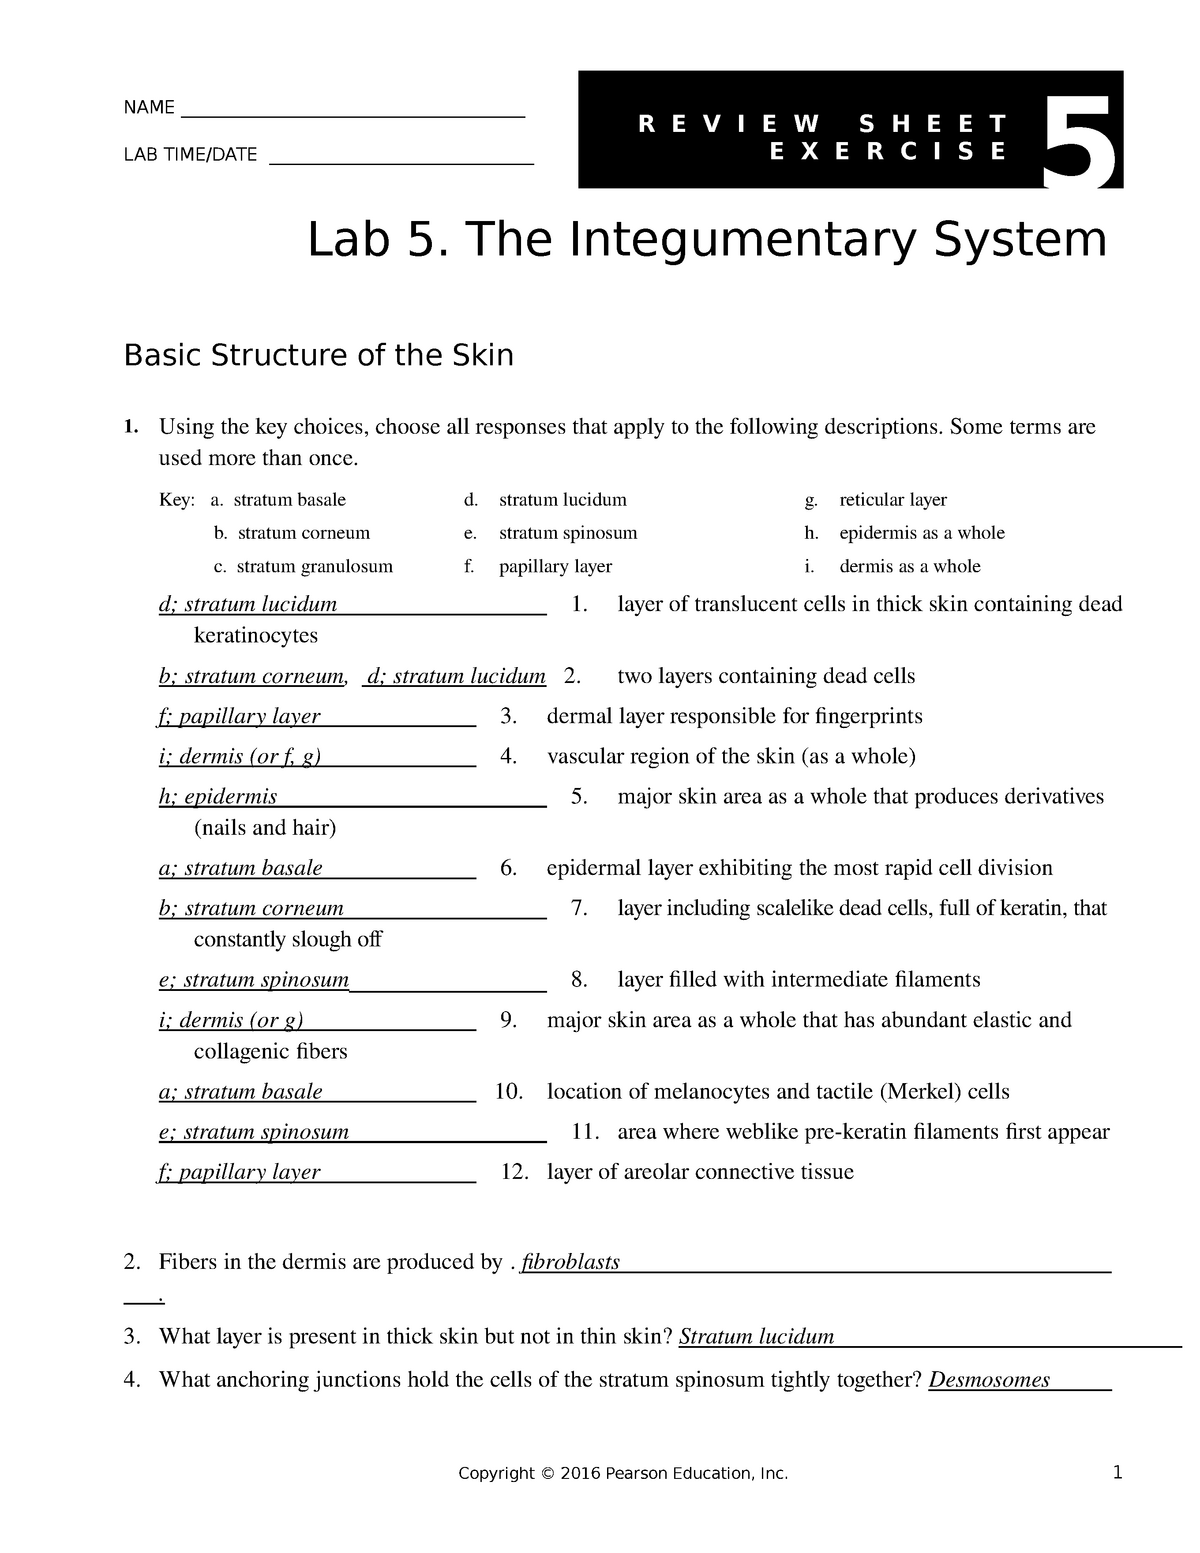 Bestseller Chapter 5 The Integumentary System Packet Answers